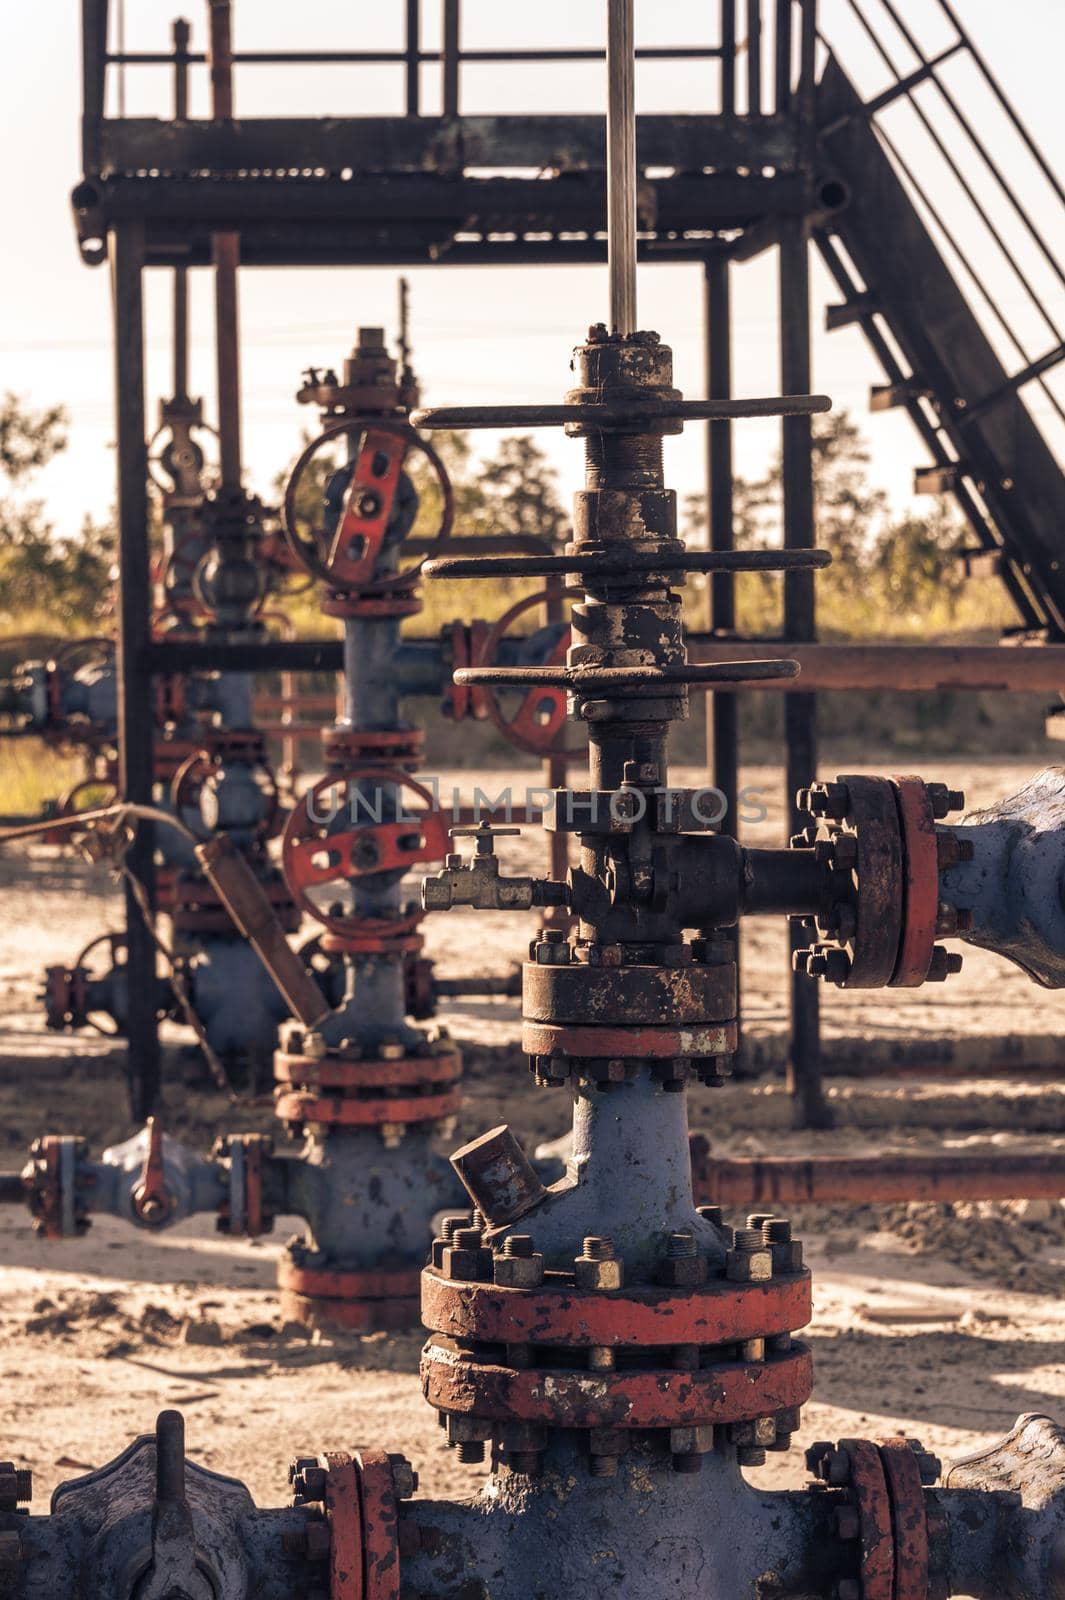 Valves armature of an oil well mouth. Oil and gas industry theme. Petroleum concept. Russia, Sibirea.